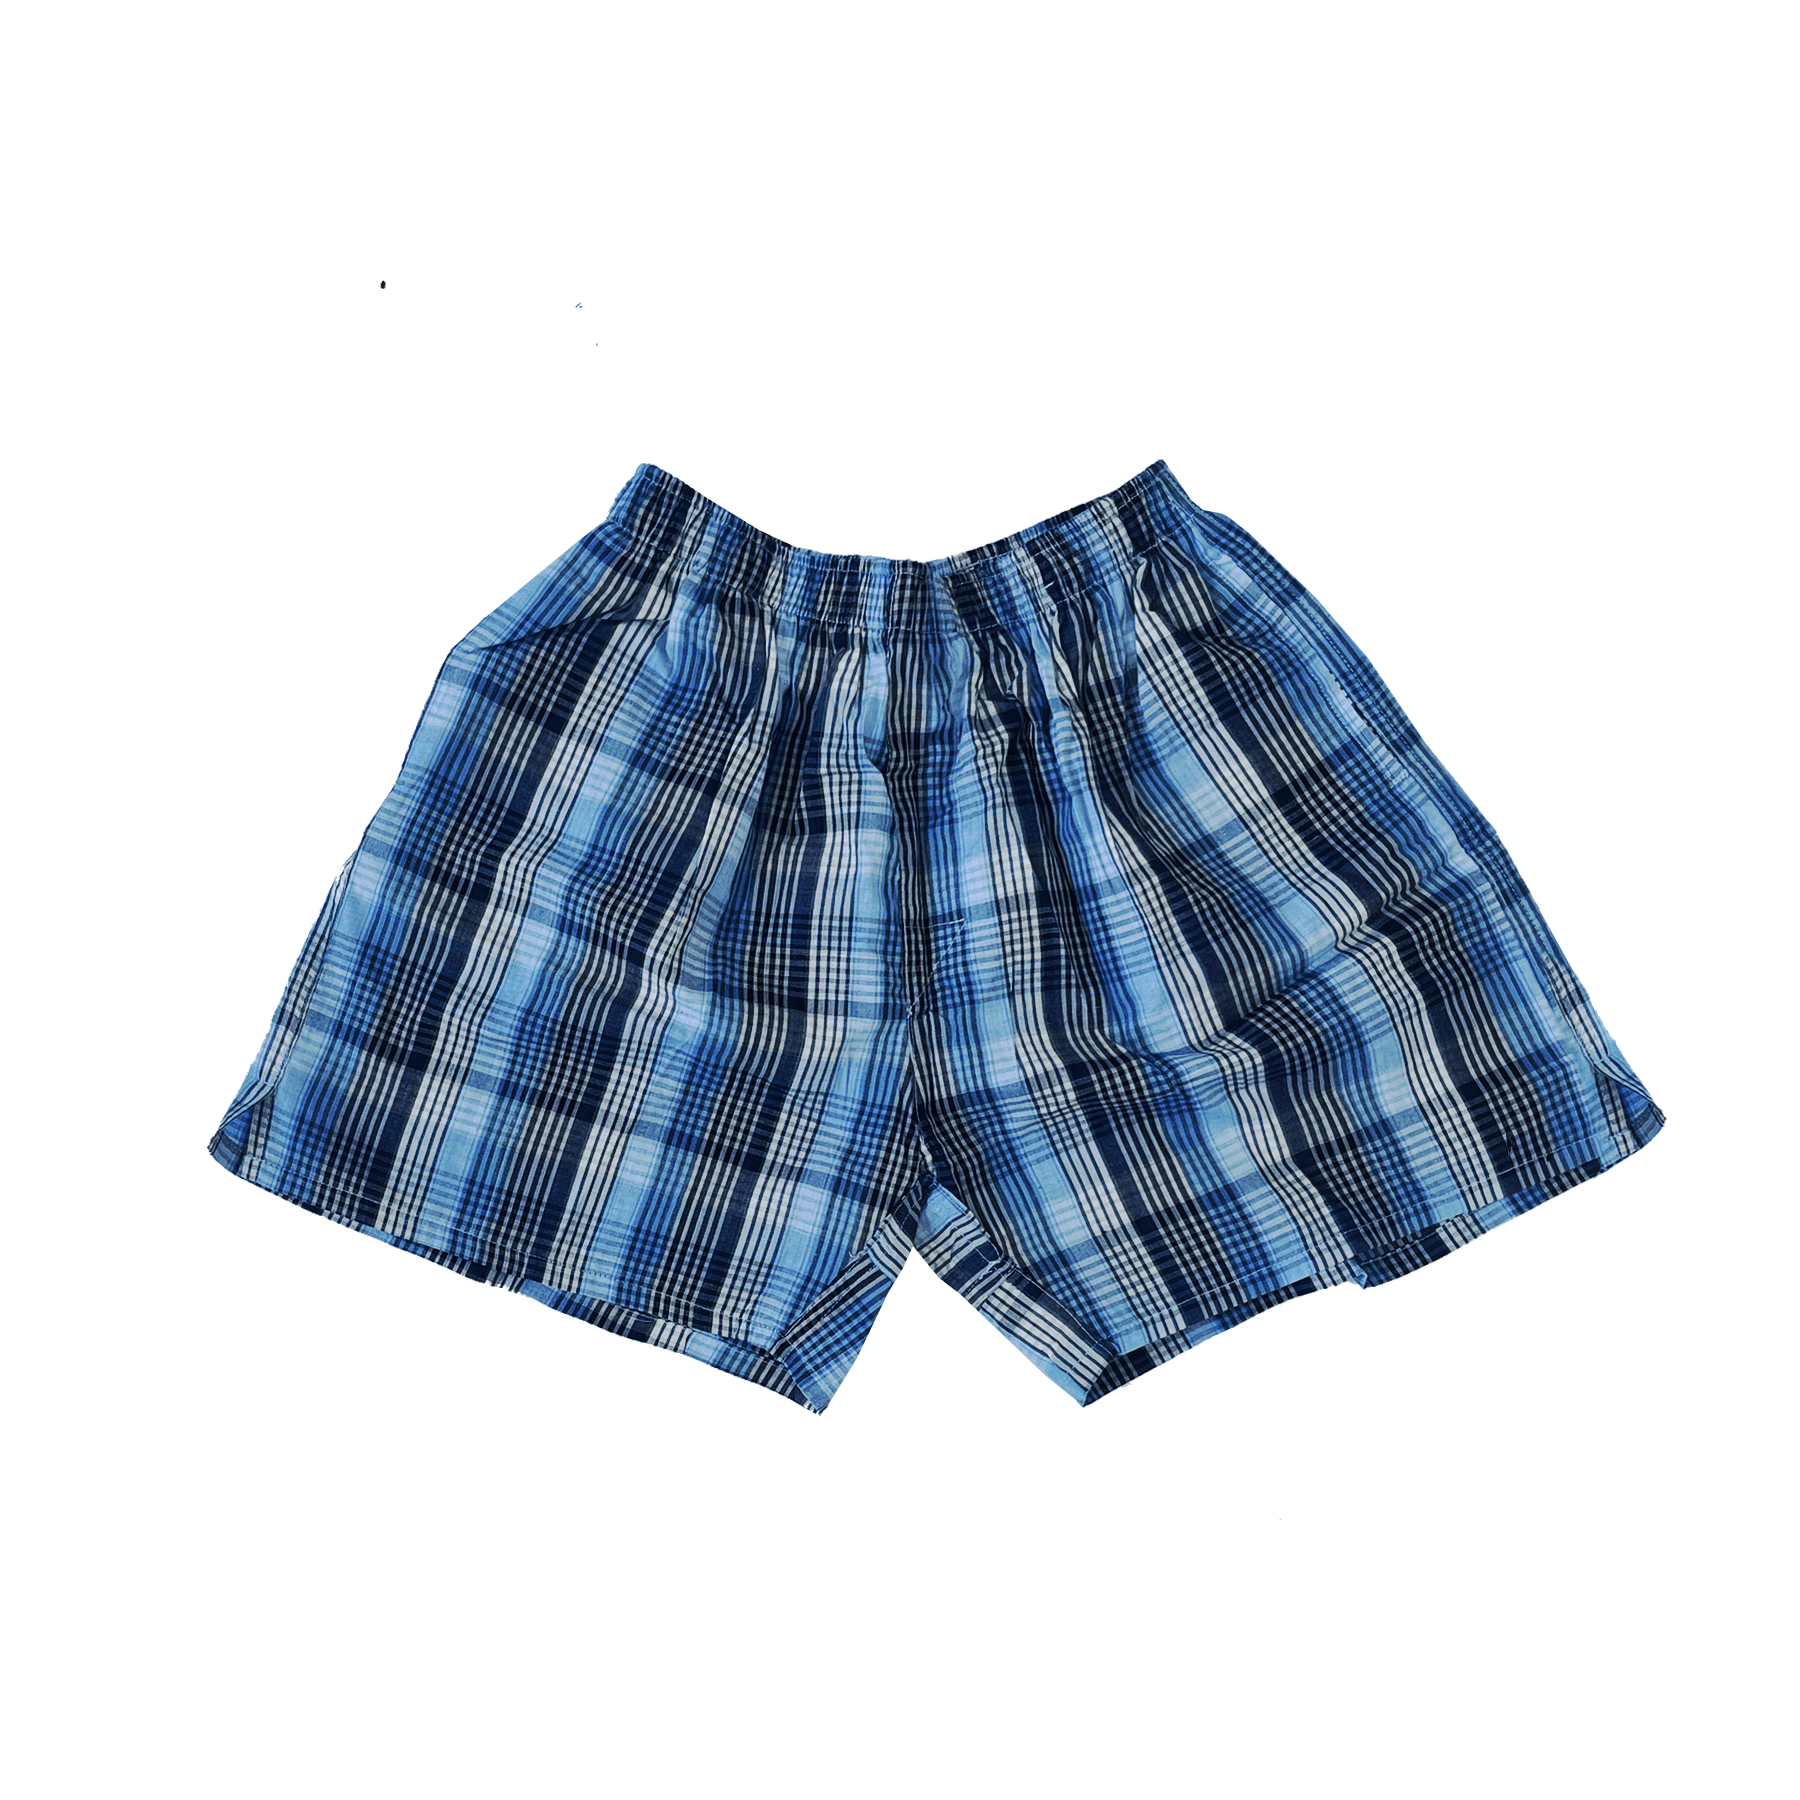 Man Short Pants Fast Delivery Quick Dry Cheap Price Oem Each One In Opp Bag Made In Vietnam Manufacturer 4